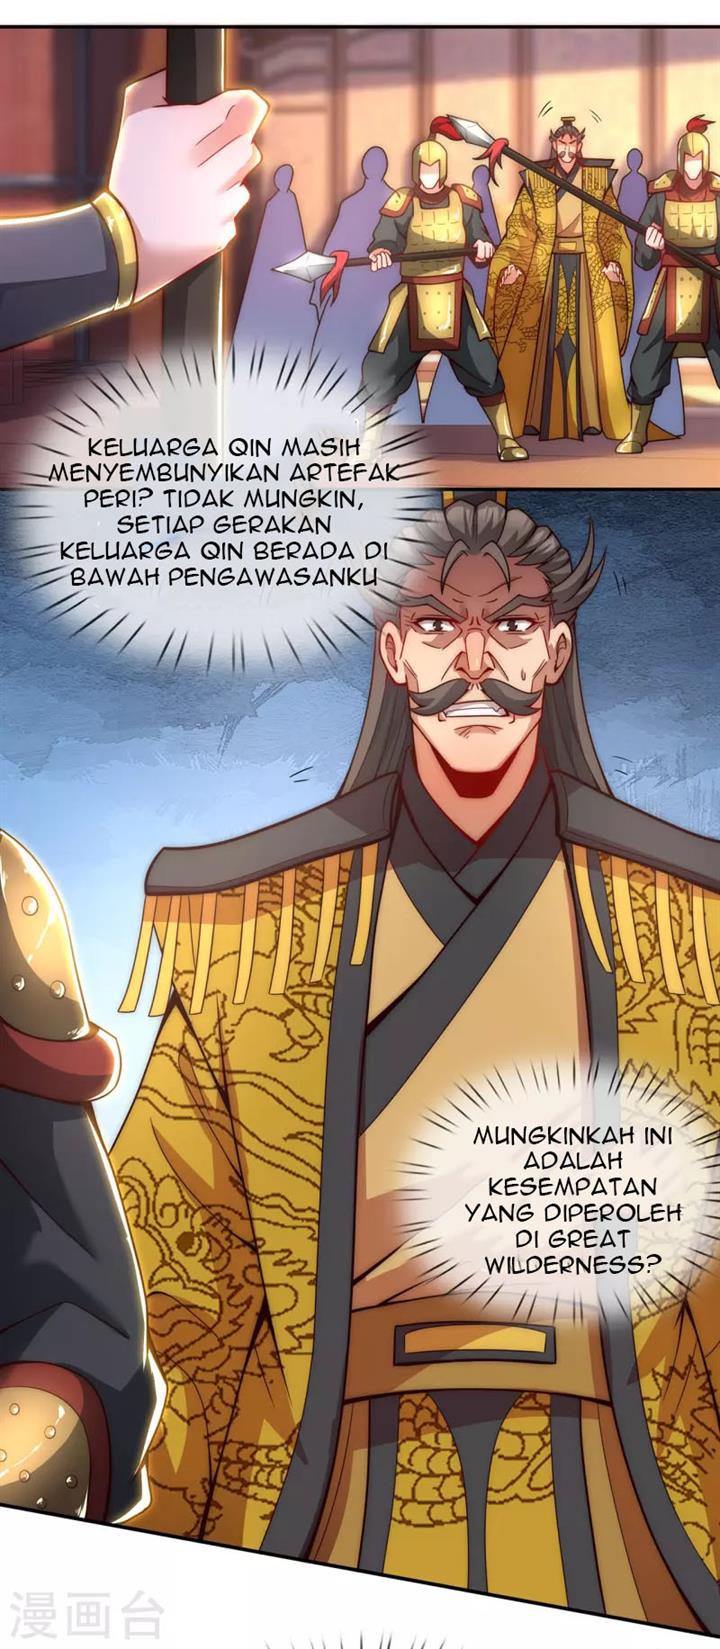 Xuantian Supreme Chapter 4